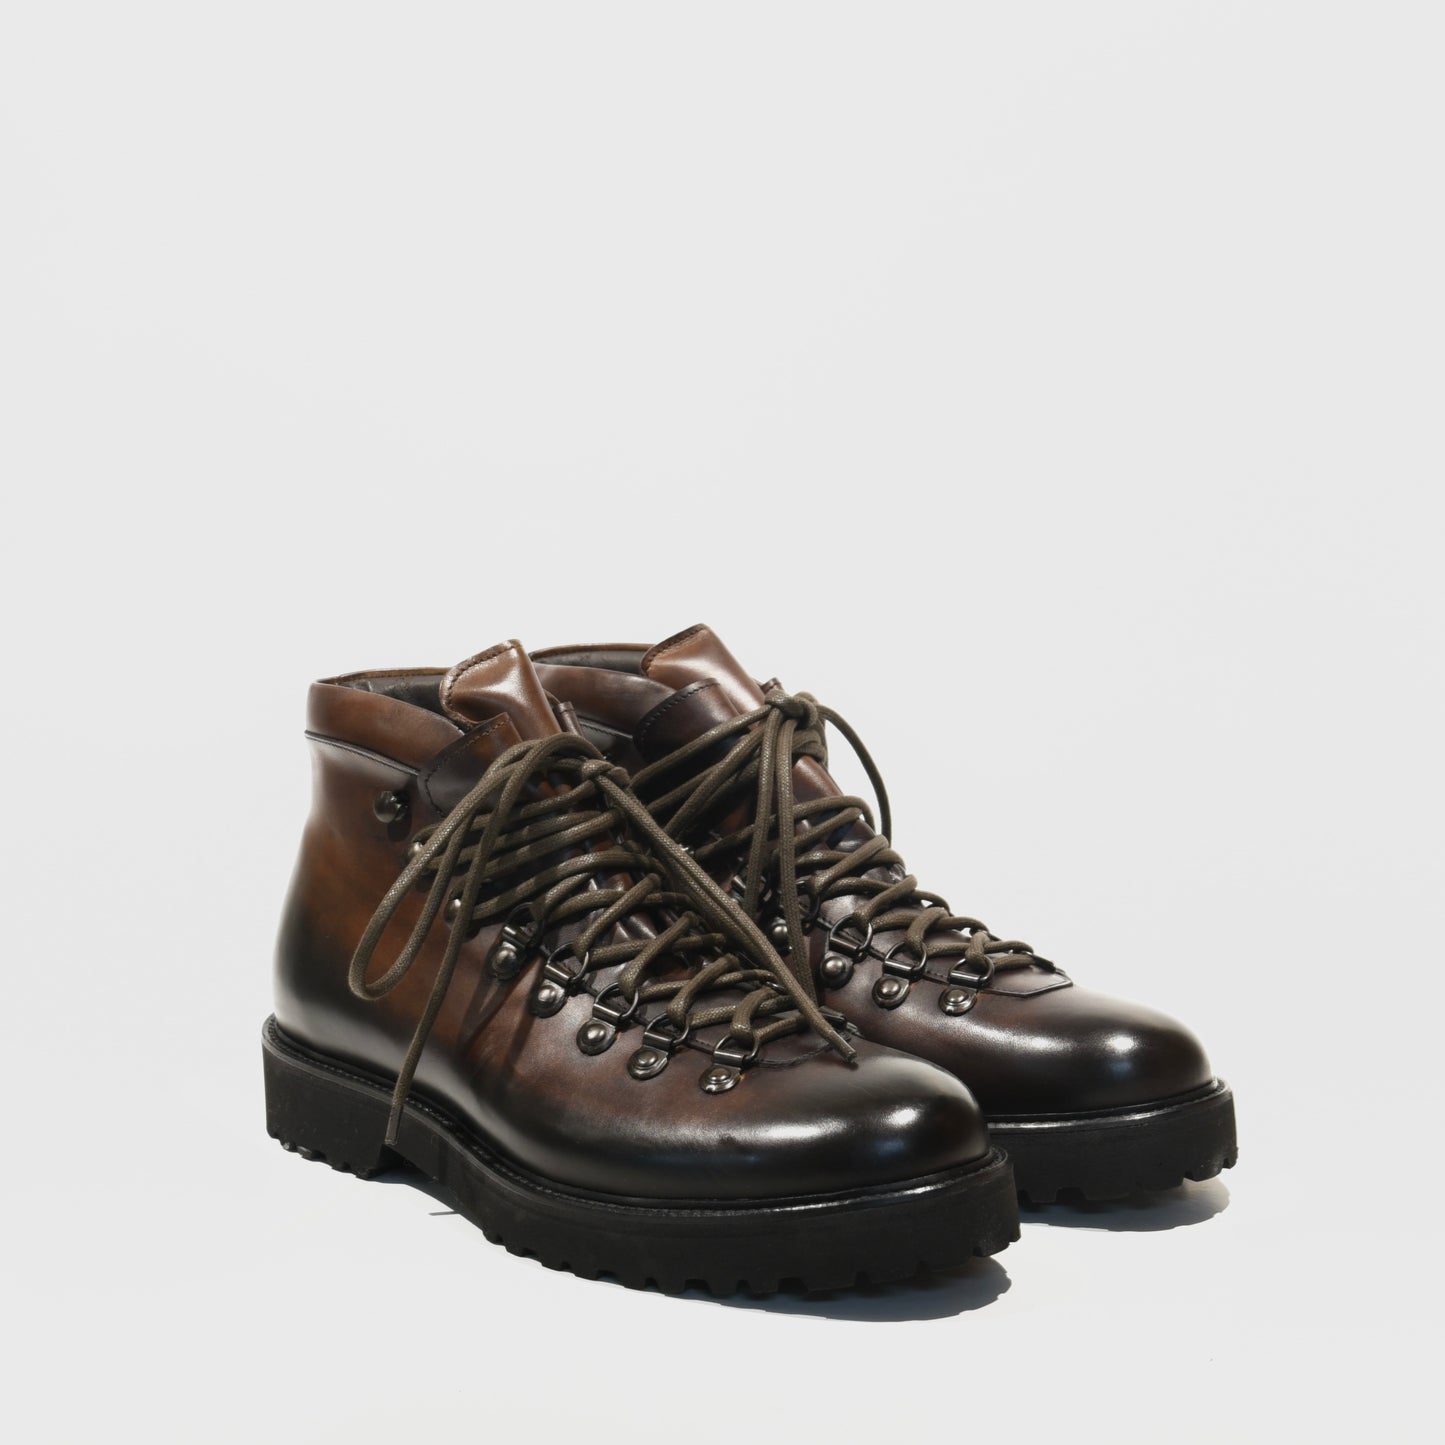 Shalapi Italian boots for men in brown